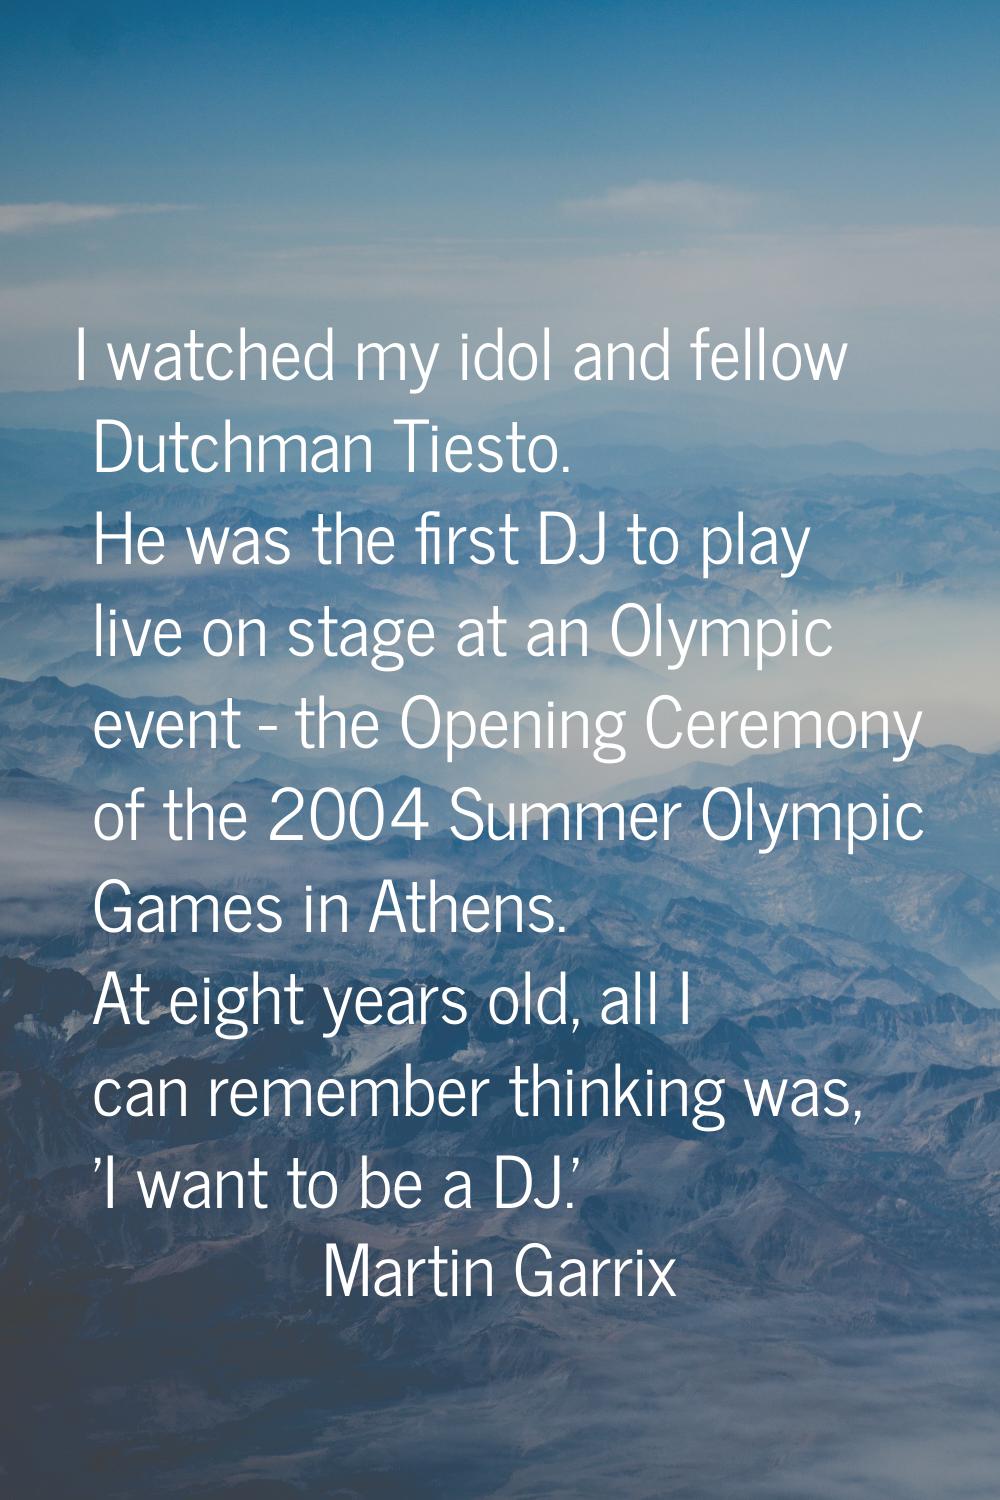 I watched my idol and fellow Dutchman Tiesto. He was the first DJ to play live on stage at an Olymp